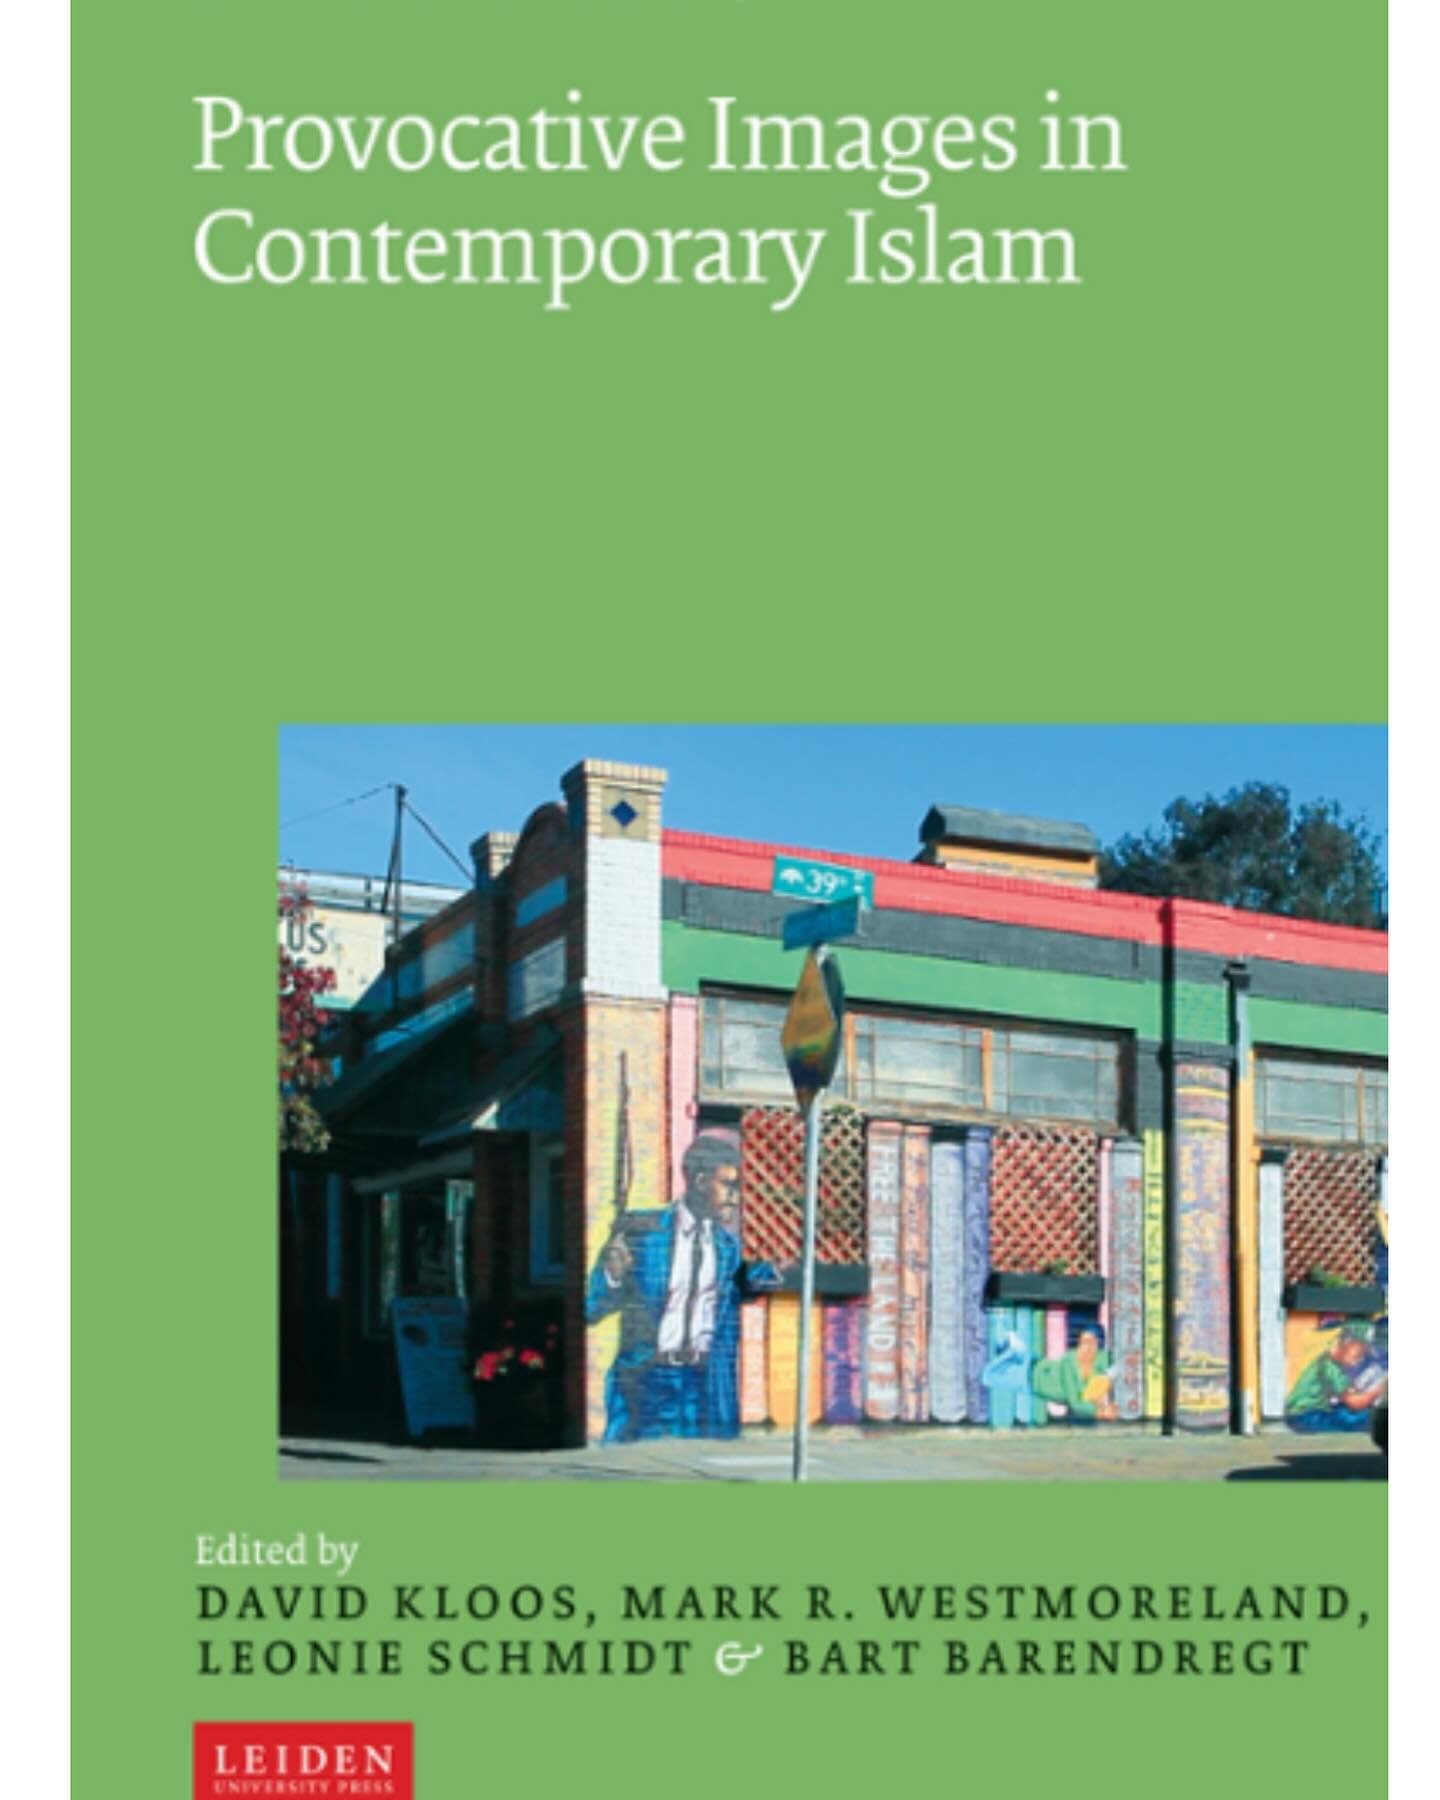 I have a photo essay/chapter in this edited volume on &ldquo;provocative images of Islam.&rdquo; My piece on Islamoscaping Medina by the Bay includes the book&rsquo;s cover image, an image of our liberatory lineages on the wall of Marcus Books in Oak